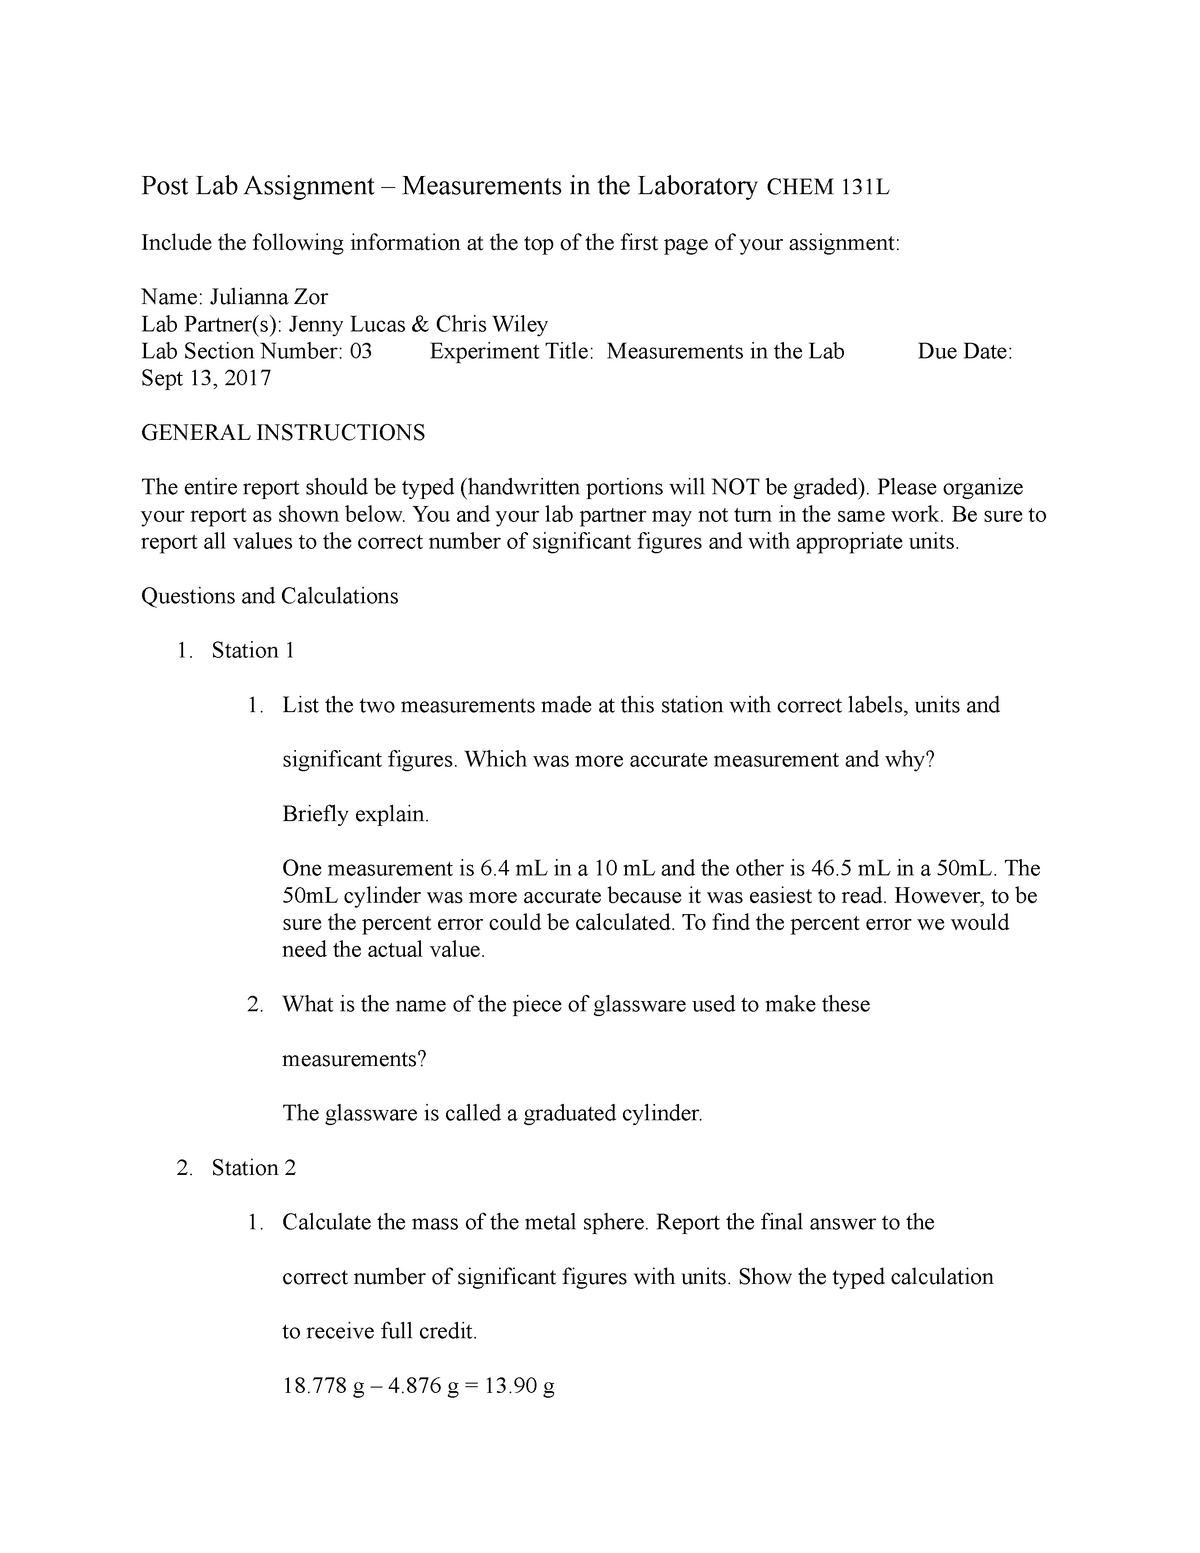 Chem 131 Post Lab 1 The Questions And Answers For Post Lab Post Lab Assignment 